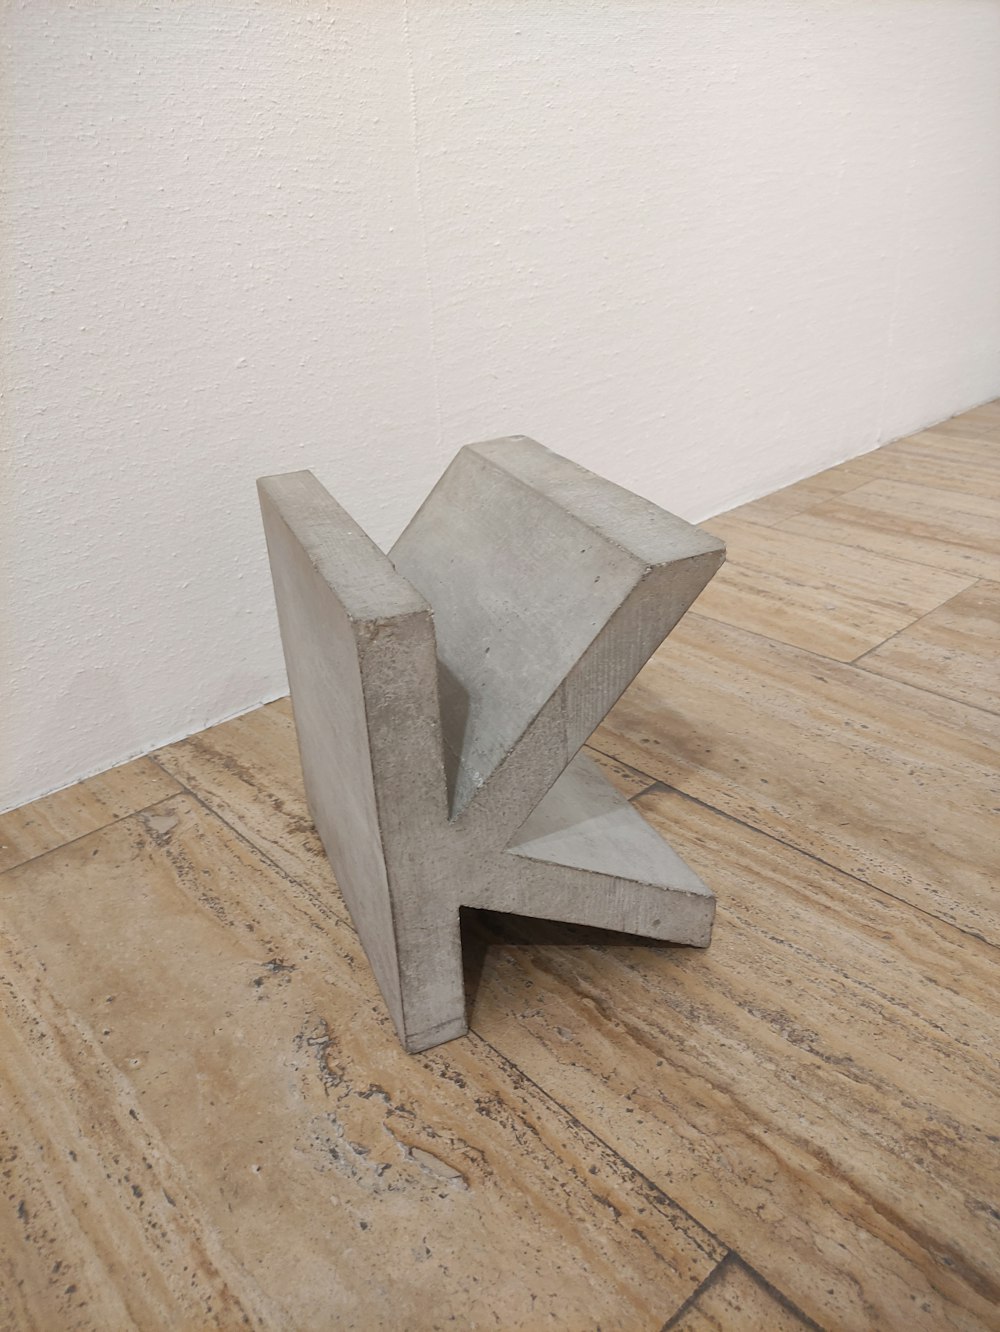 a concrete sculpture sitting on top of a wooden floor